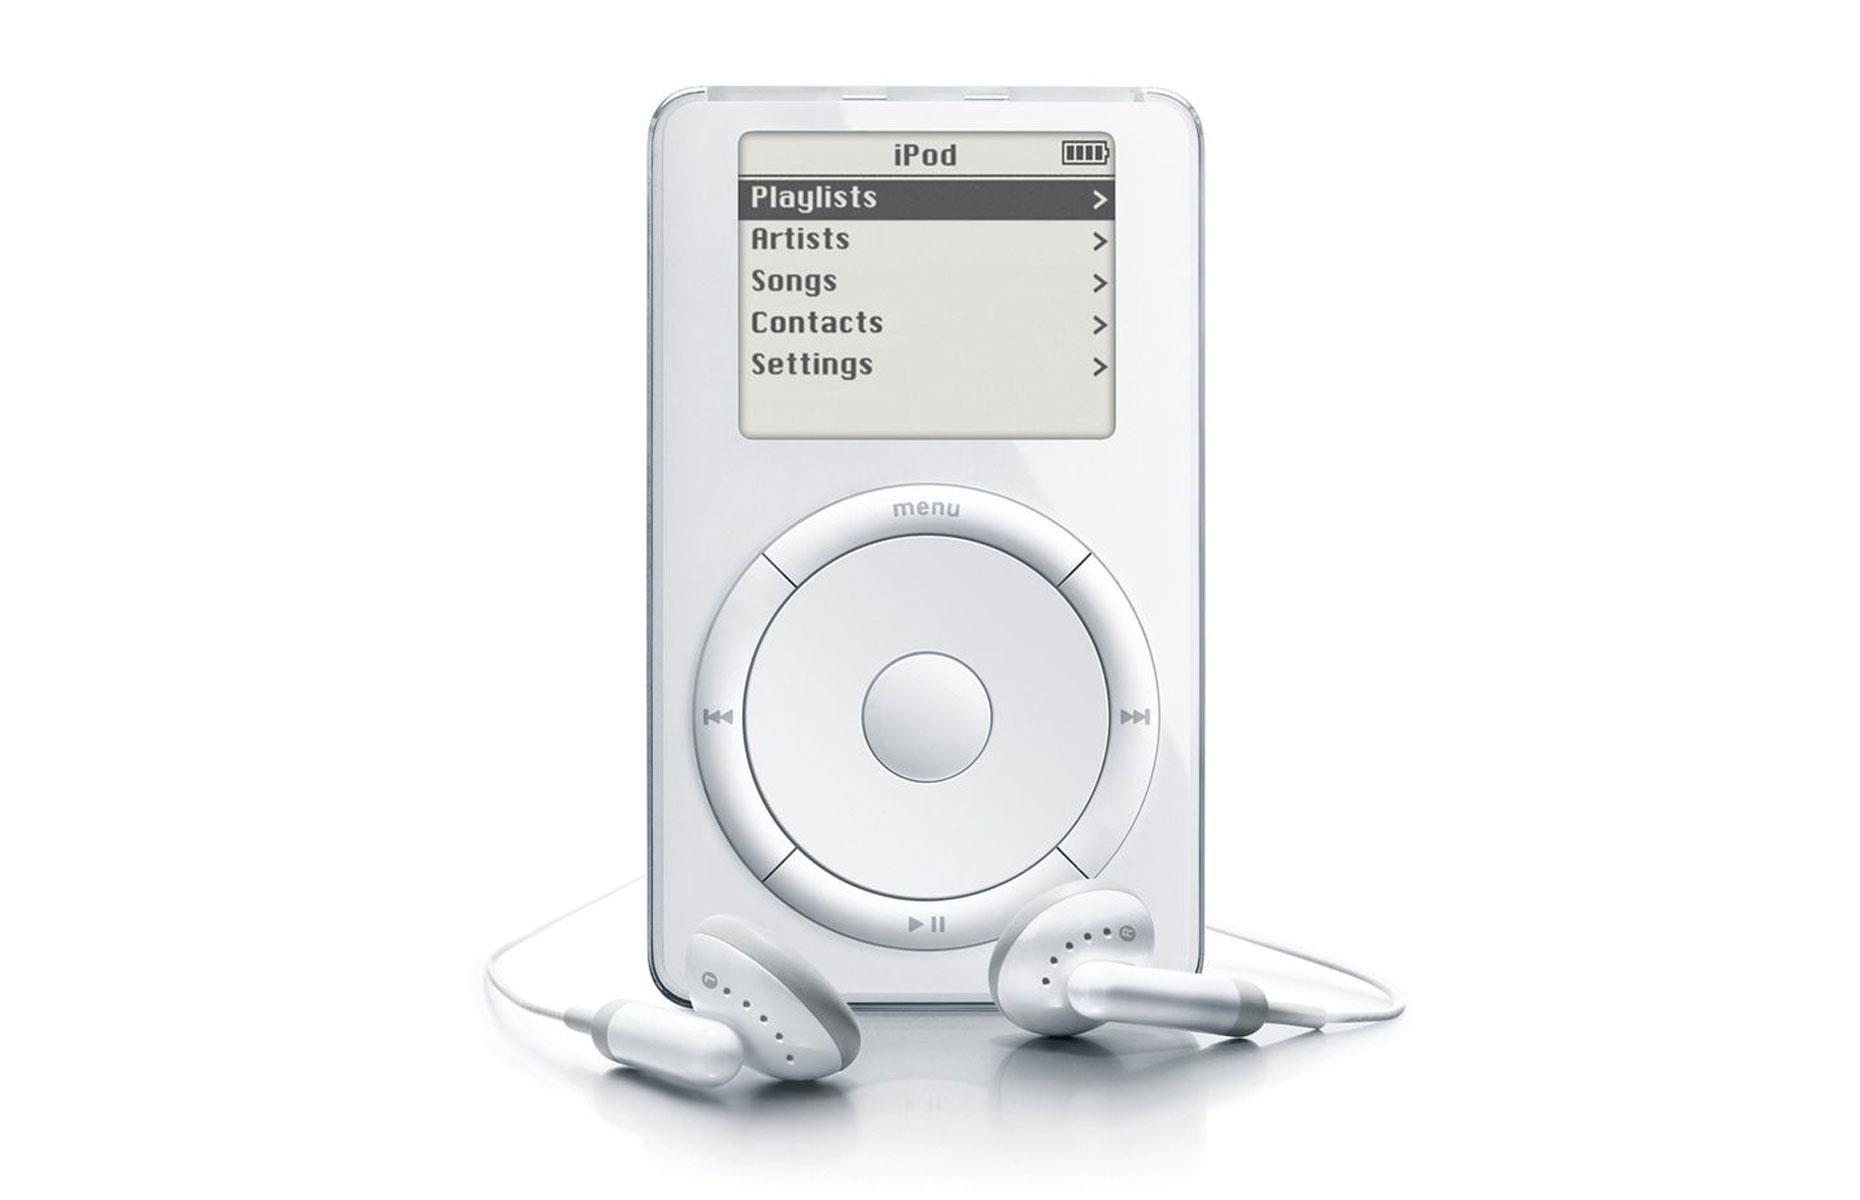 Apple iPod Classic 1st Generation: up to $20,000 (£15k)